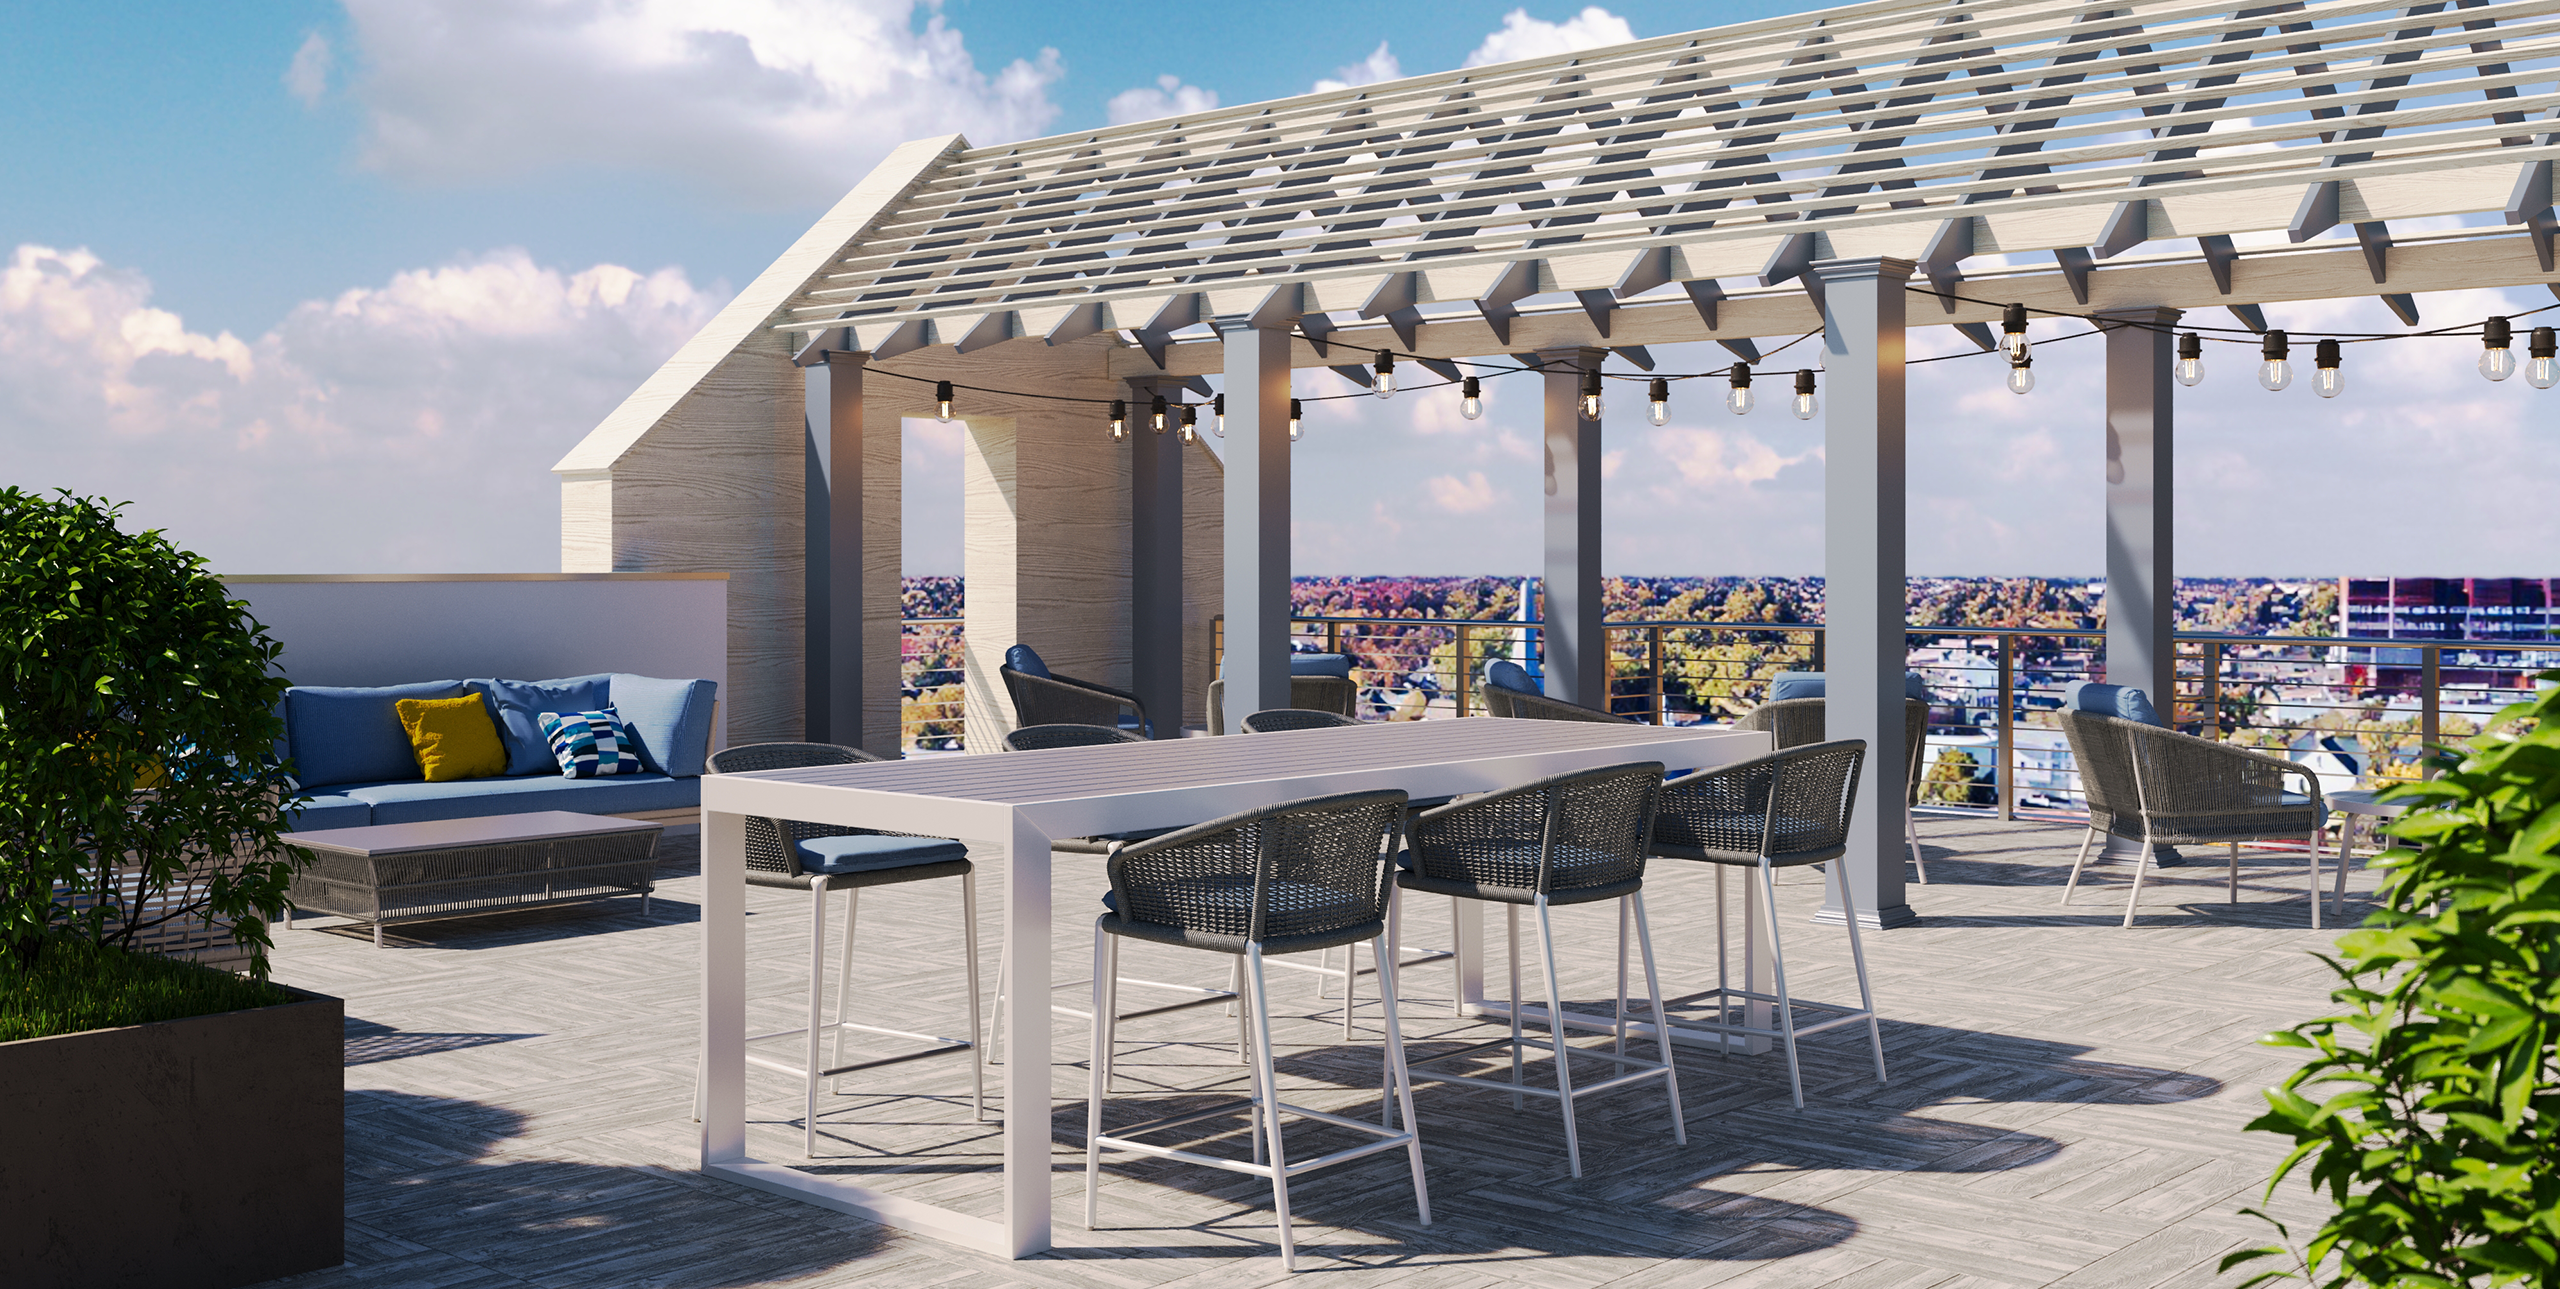 Rendering of rooftop lounge at Shoregate